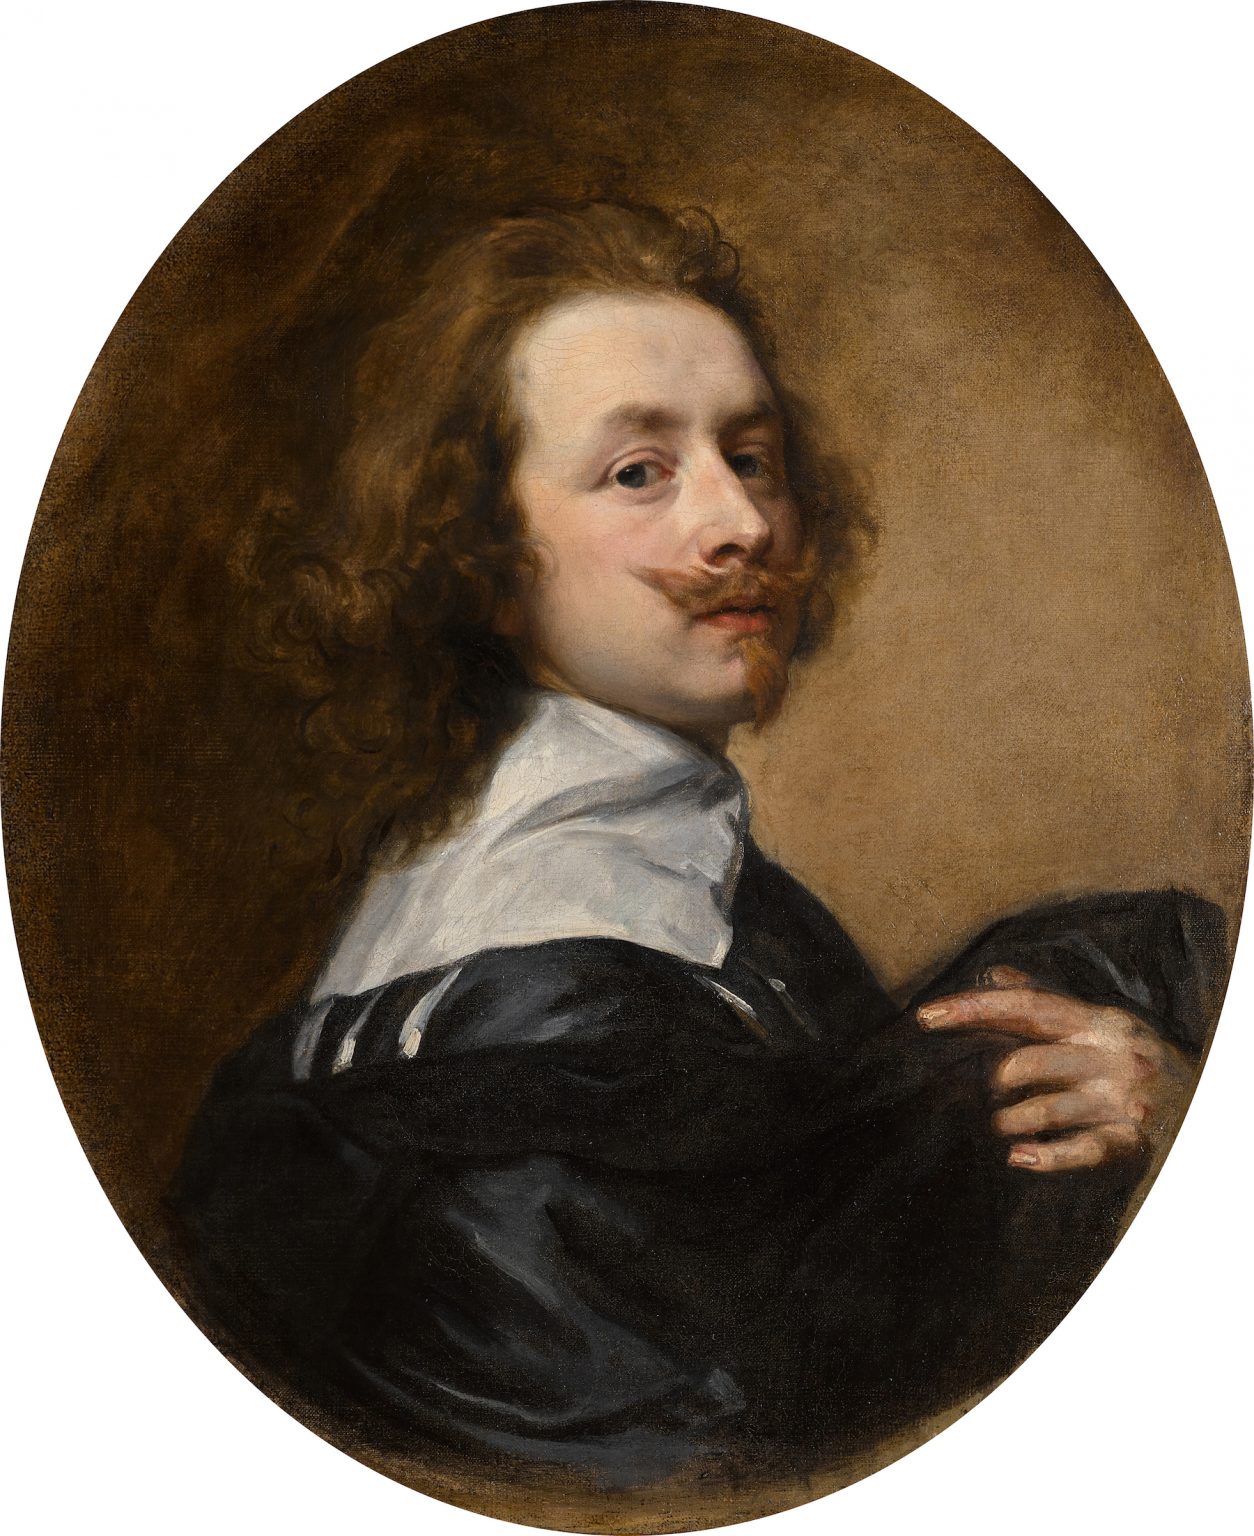 TTFeb24 Lot 317 Sir Anthony van Dyck Self Portrait with Upturned Mustache and Raised Left Hand copy Visions Art